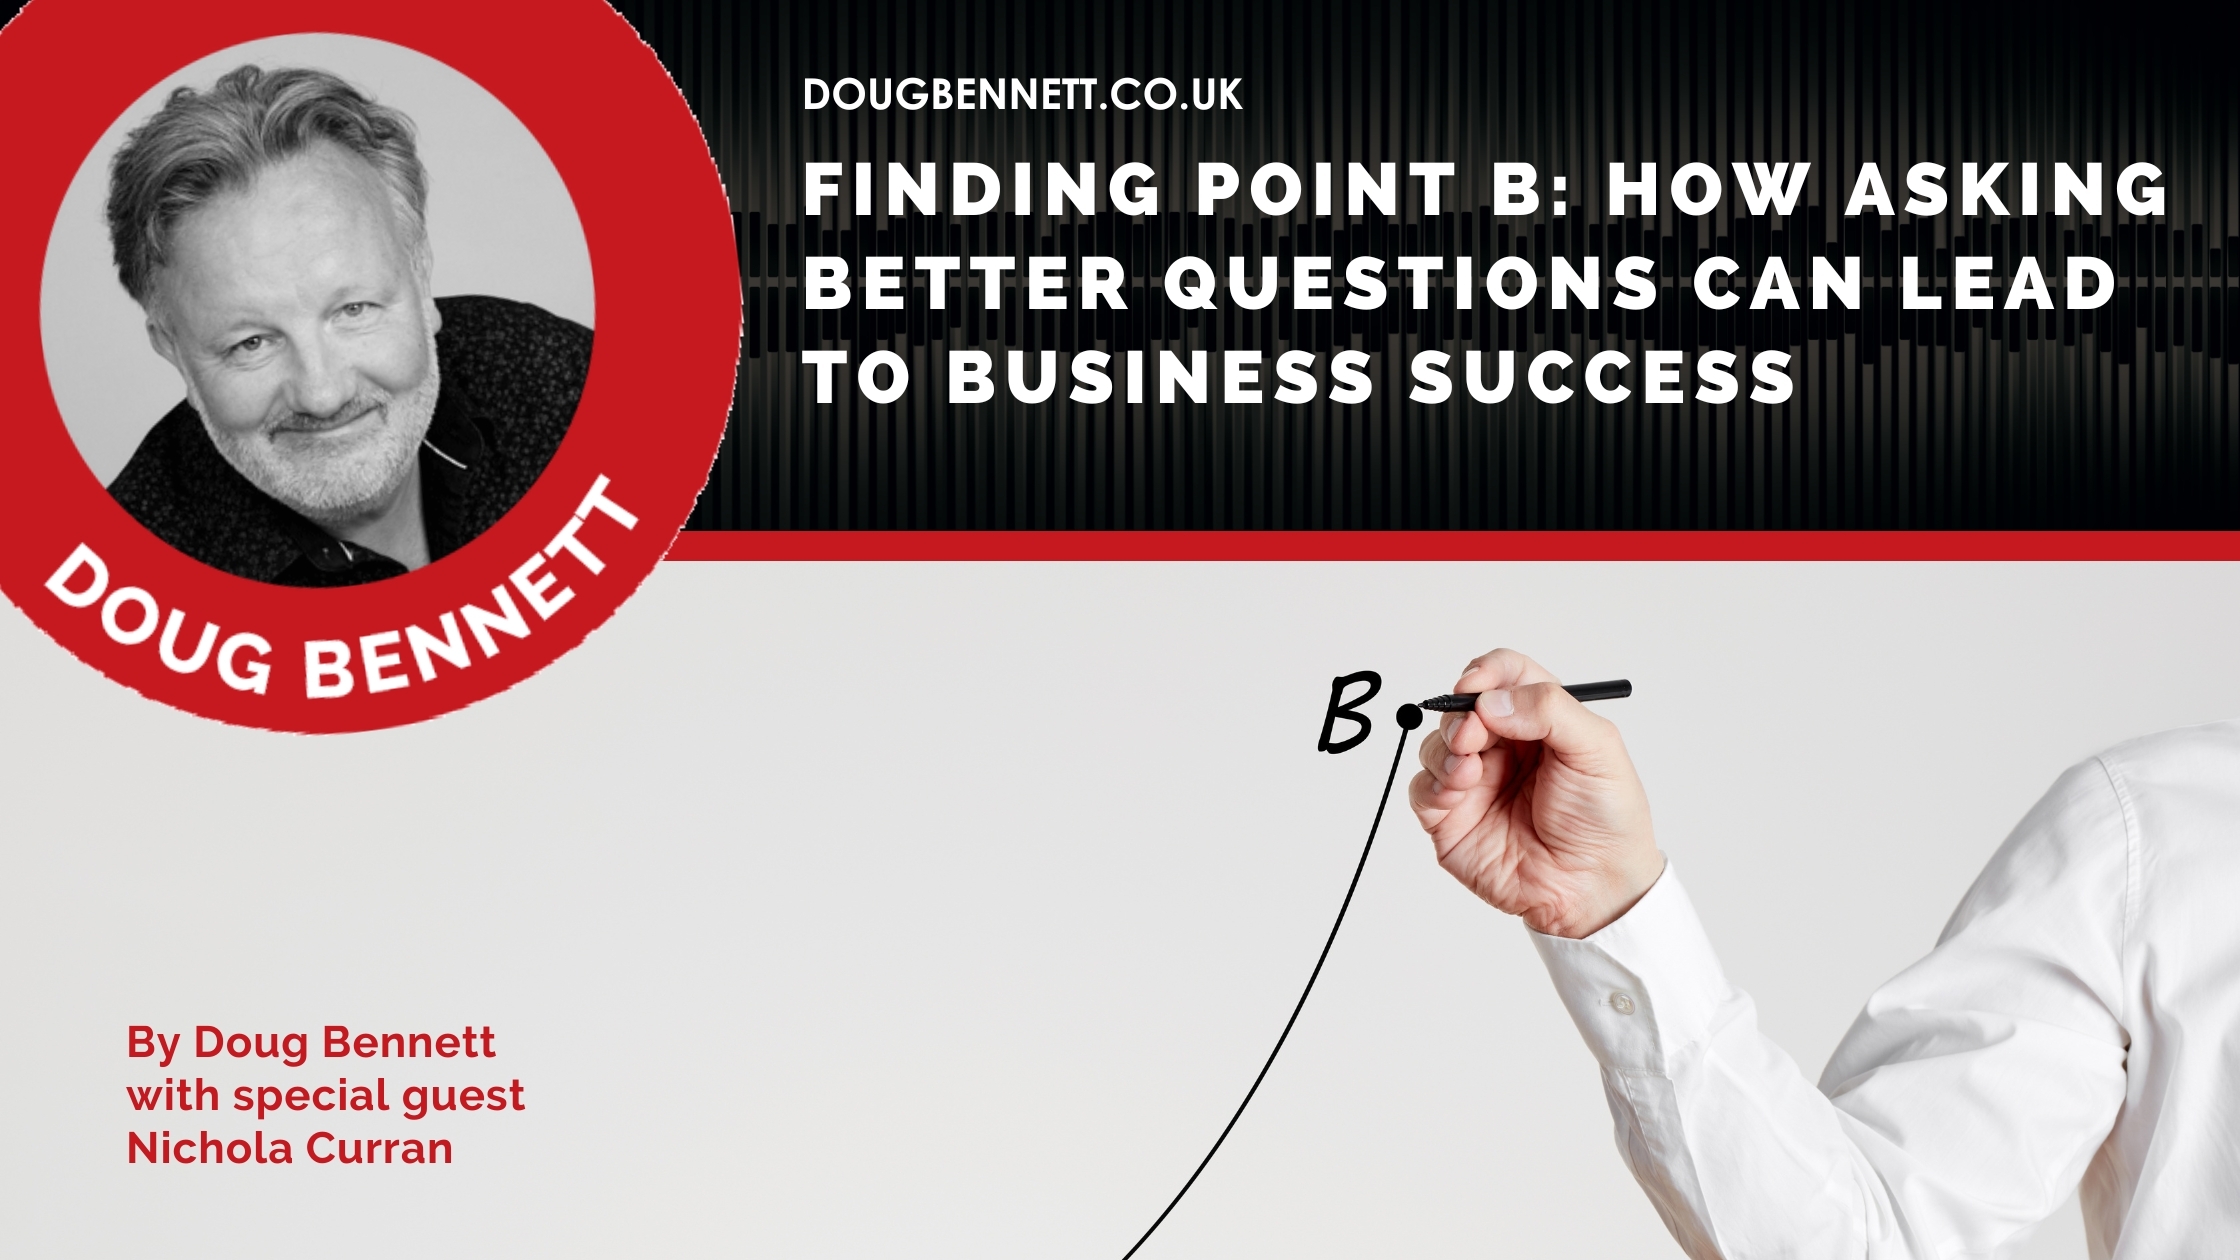 Discover the importance of asking better questions in business and how it can lead to success.